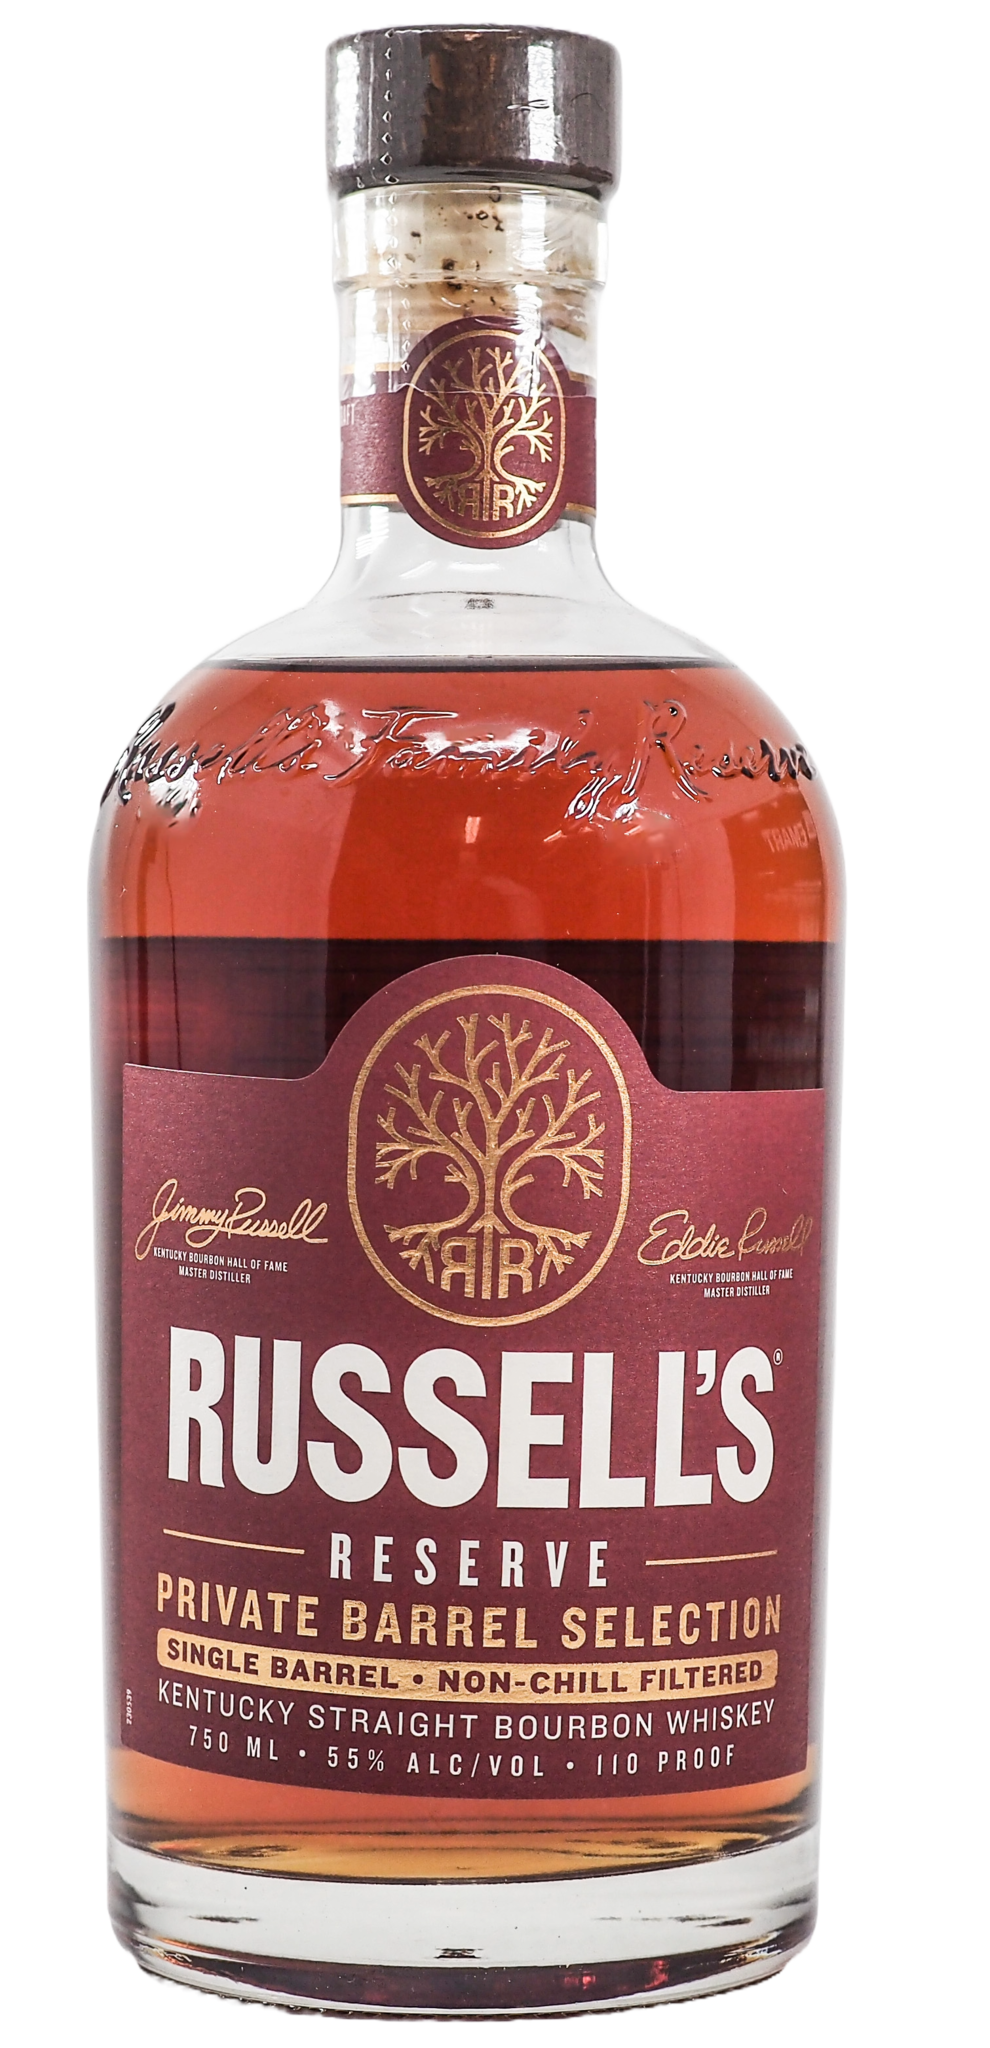 RUSSELL'S RESERVE HEALTHY SPIRITS PRIVATE BARREL SELECTION BOURBON ...